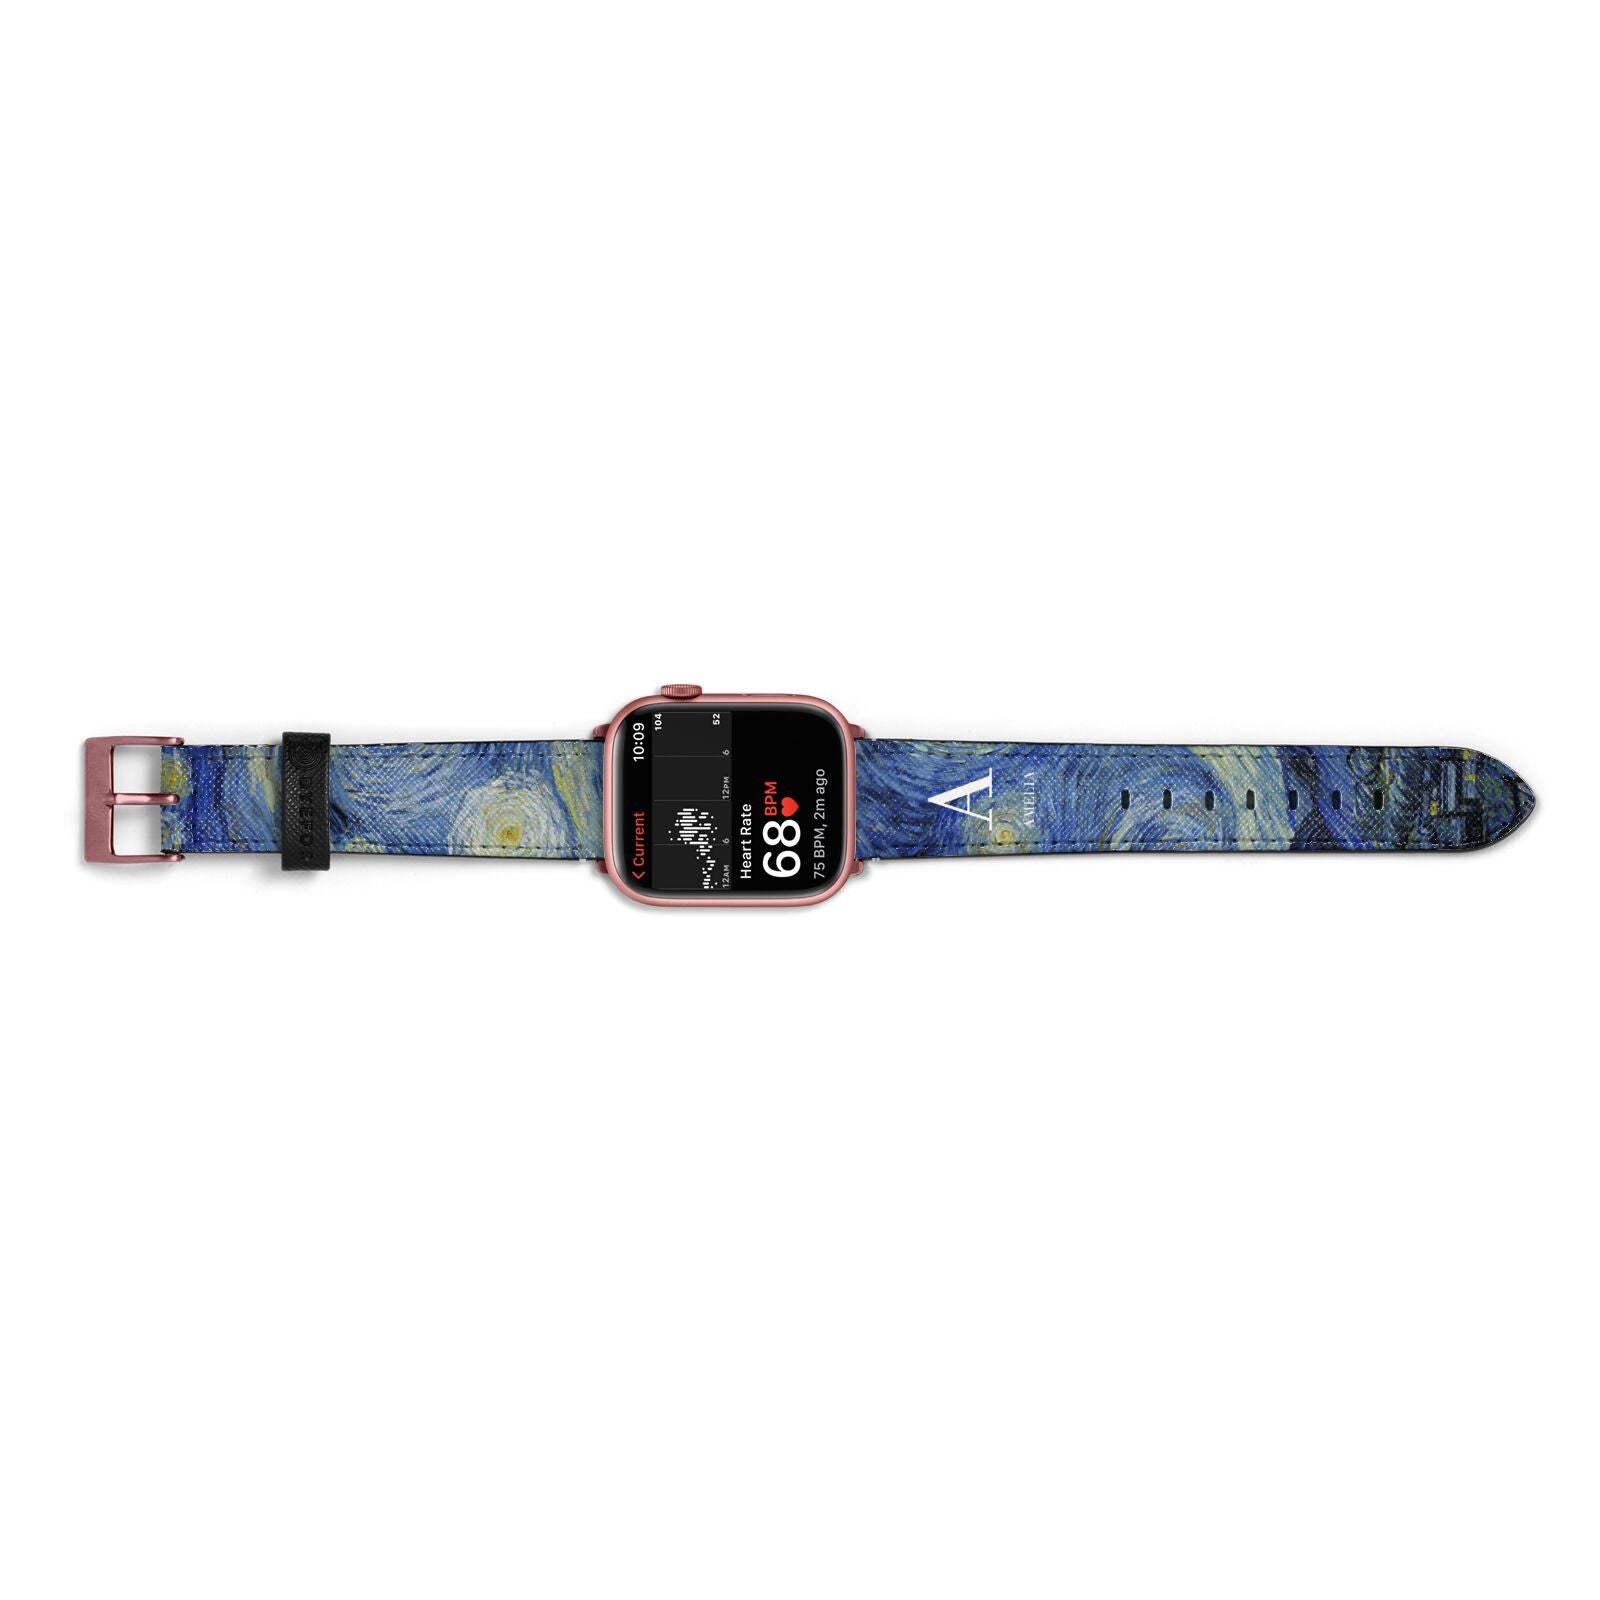 Personalised Van Gogh Starry Night Apple Watch Strap Size 38mm Landscape Image Rose Gold Hardware